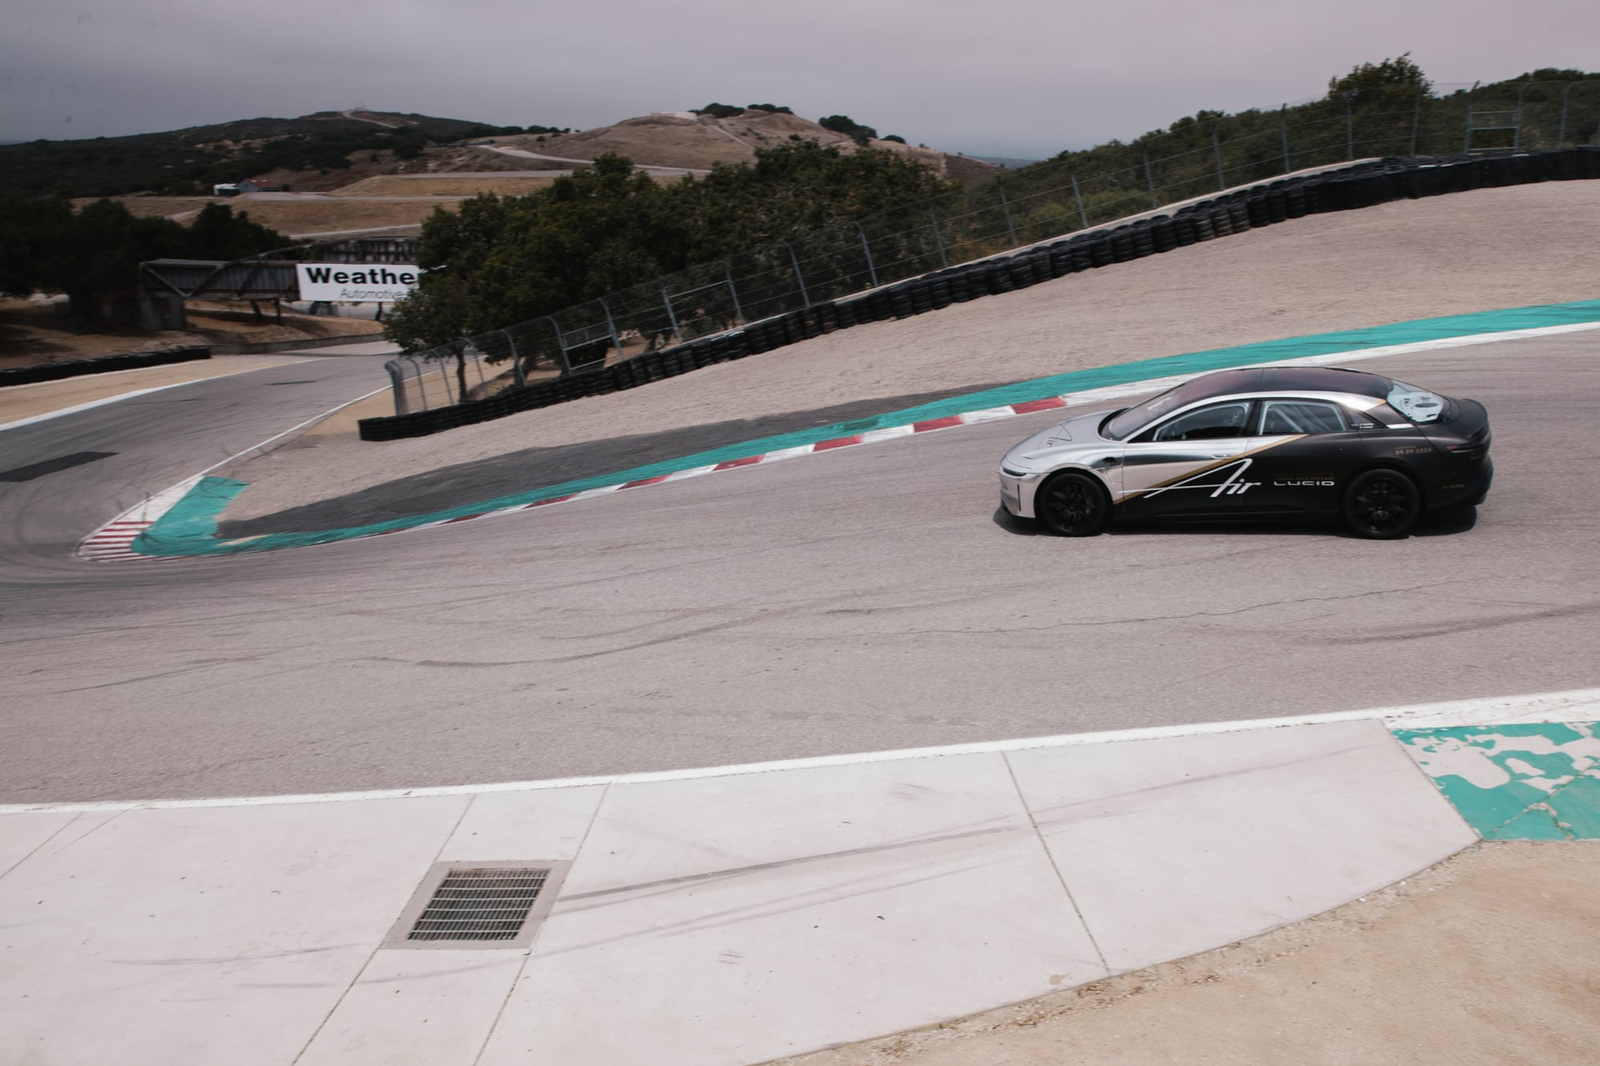 motorsport, laguna seca's future secured for generations of enthusiasts